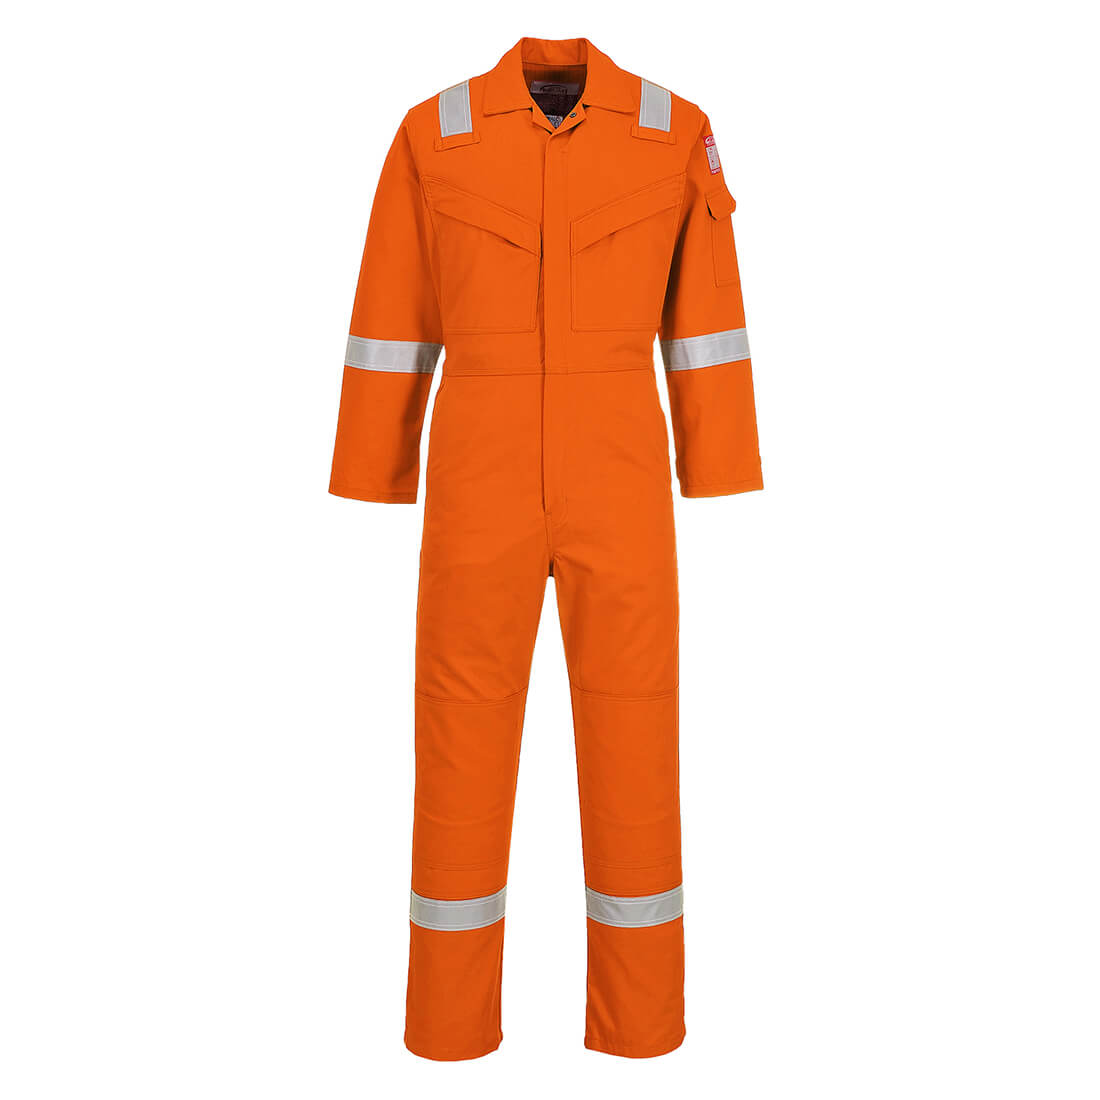 Image of Biz Flame Mens Aberdeen Flame Resistant Antistatic Coverall Orange 2XL 32"